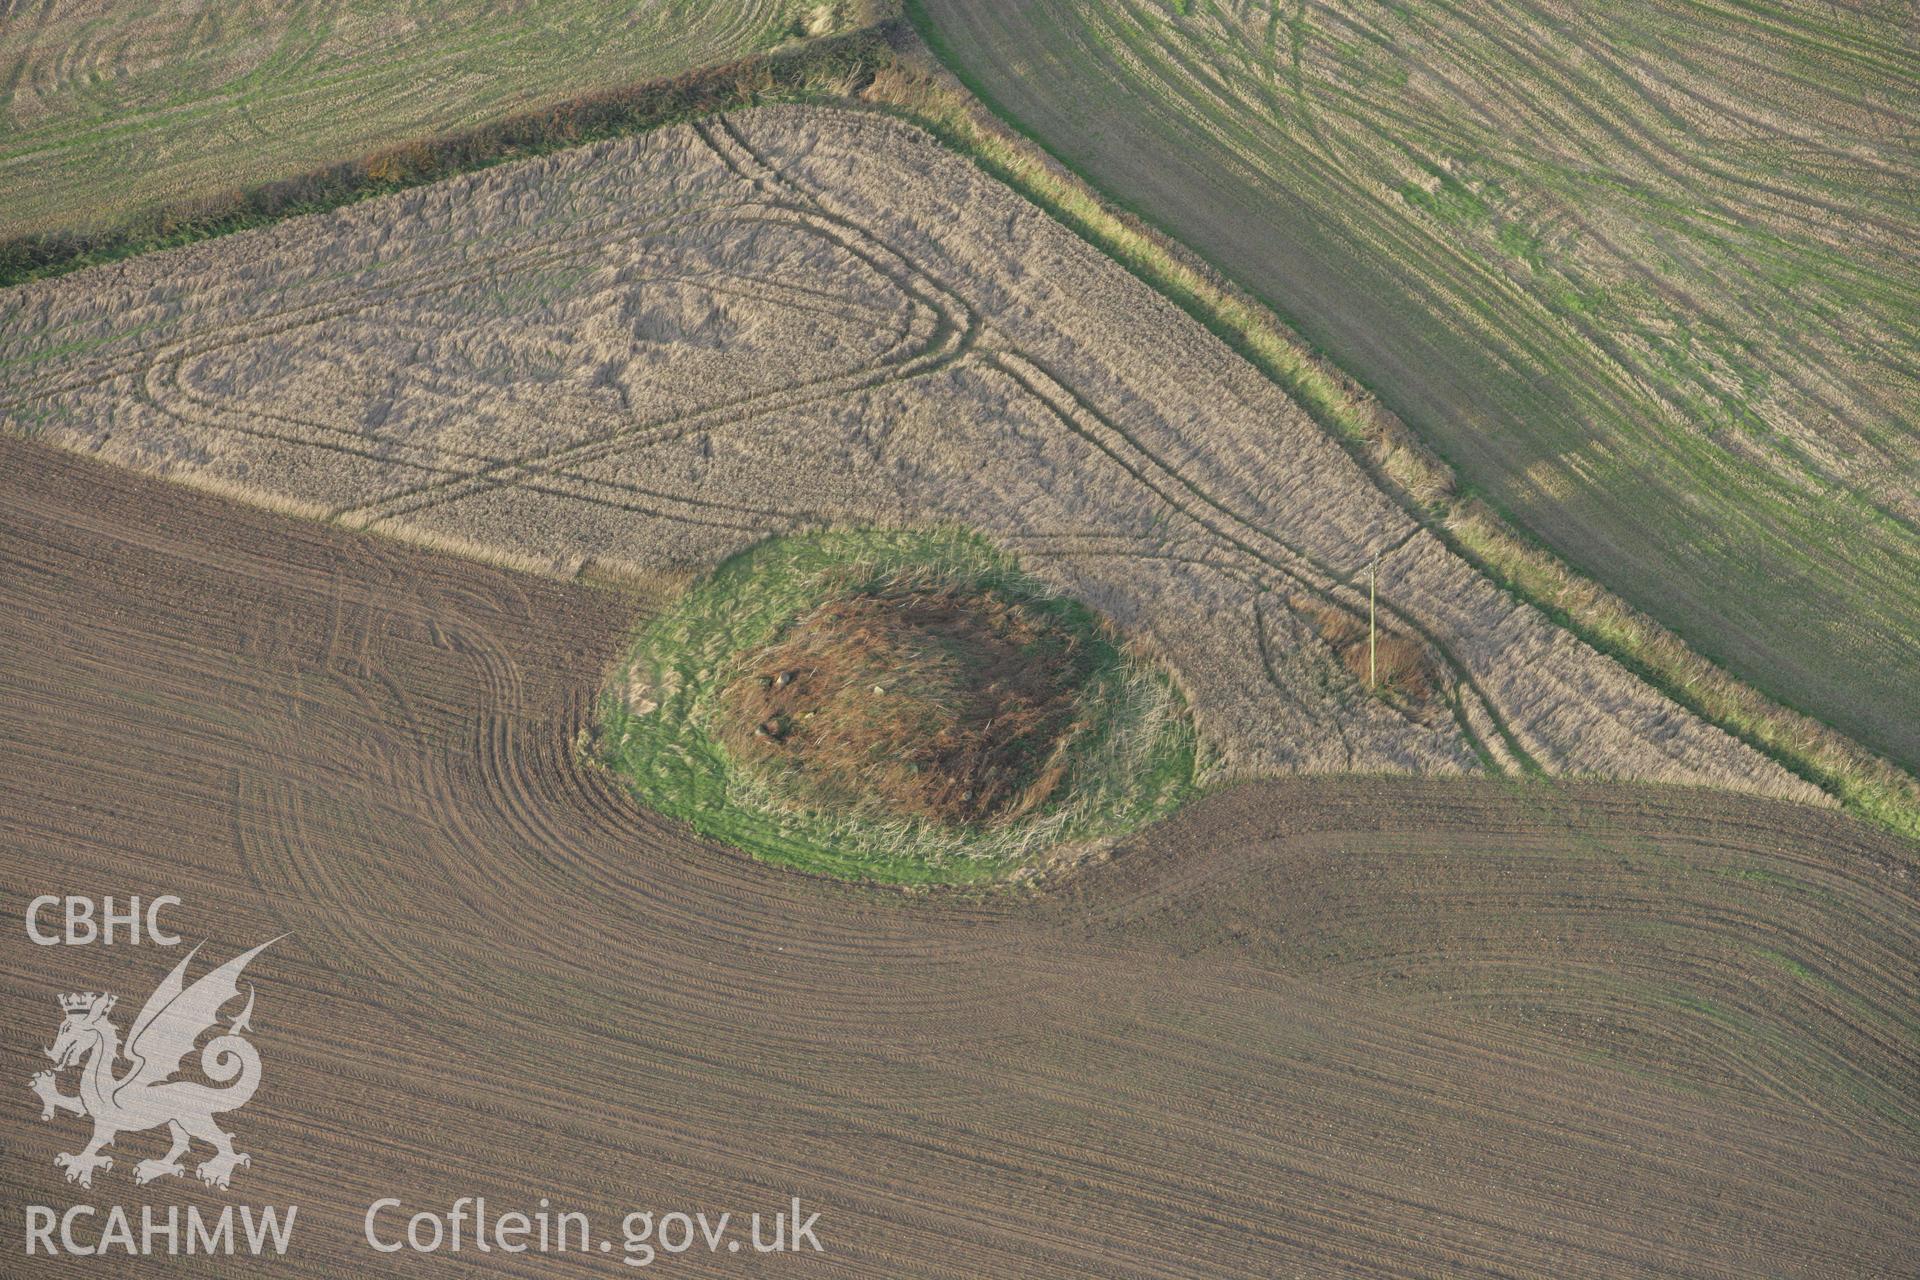 RCAHMW colour oblique photograph of Mynydd Herbert Round Barrow. Taken by Toby Driver on 12/11/2008.